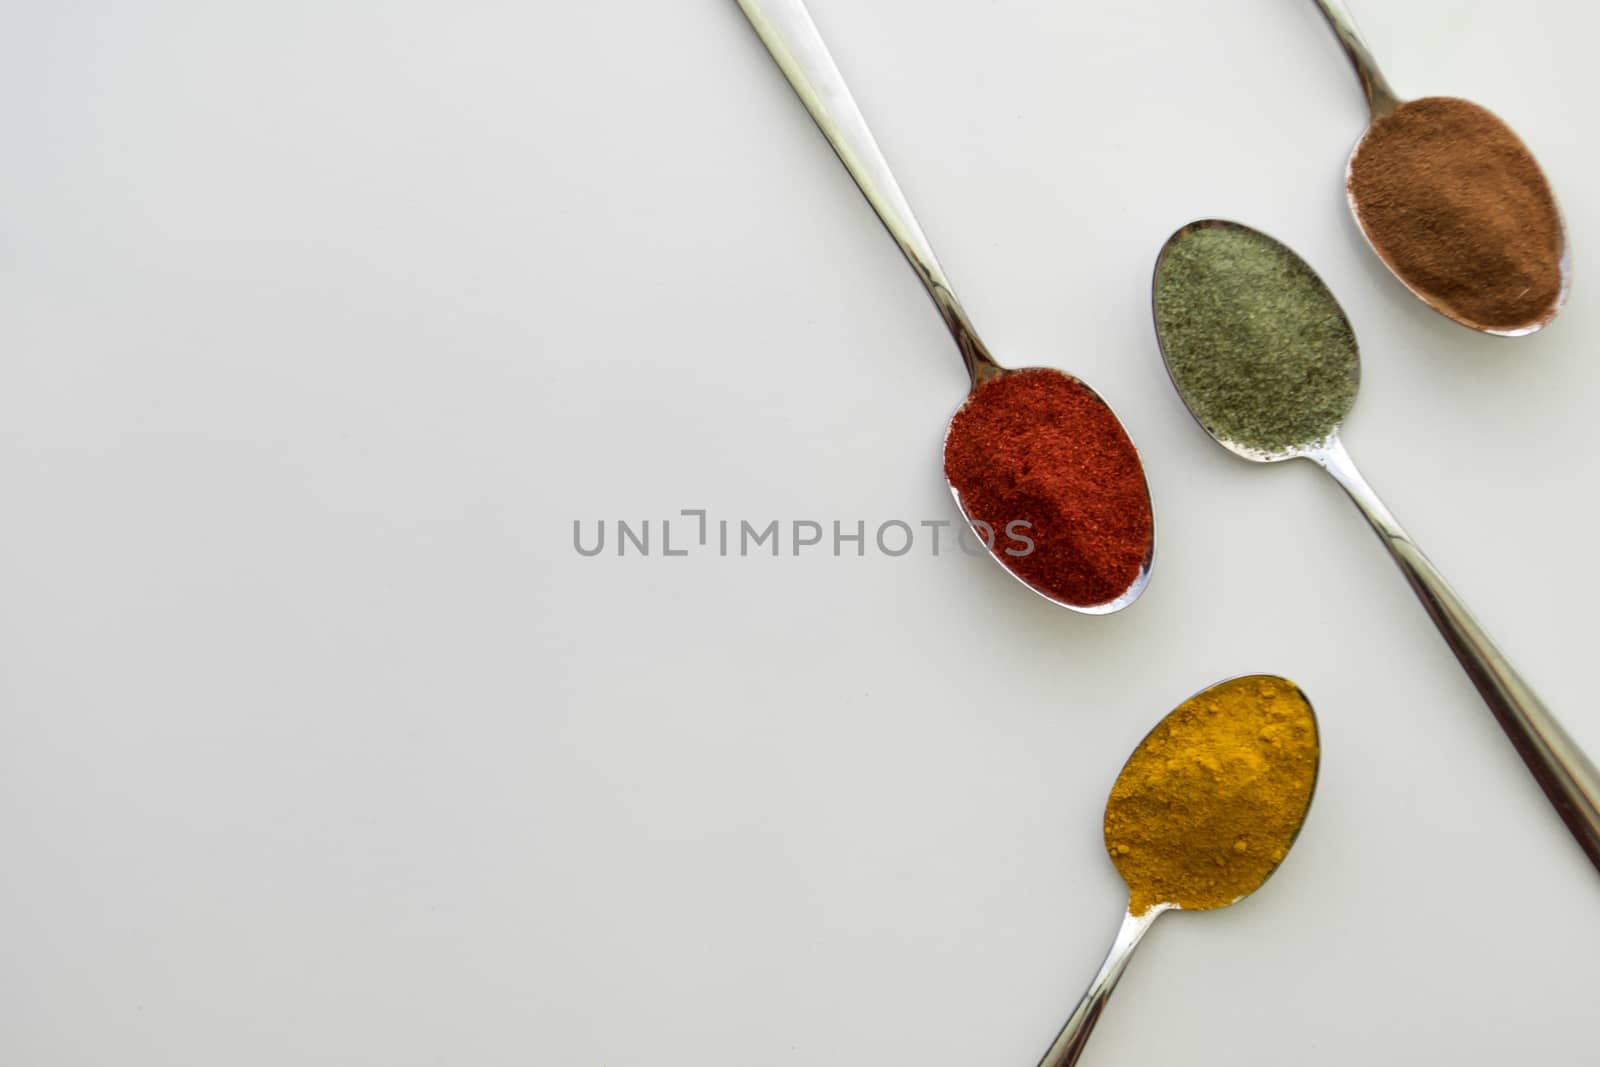 Various colorful spices arranged on spoons  with a white background